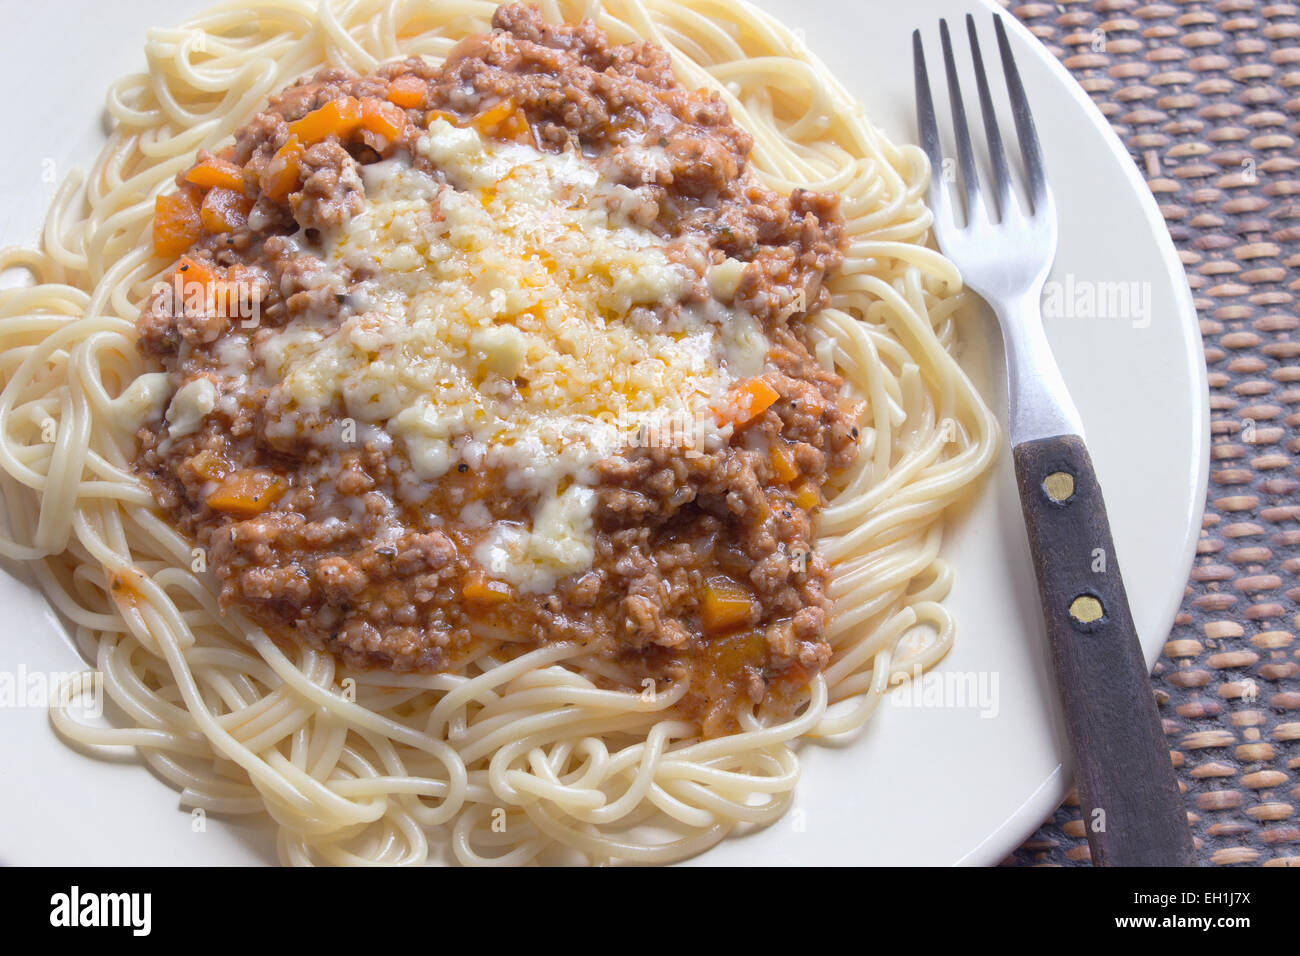 Spaghetti bolognese on plate with fork Stock Photo